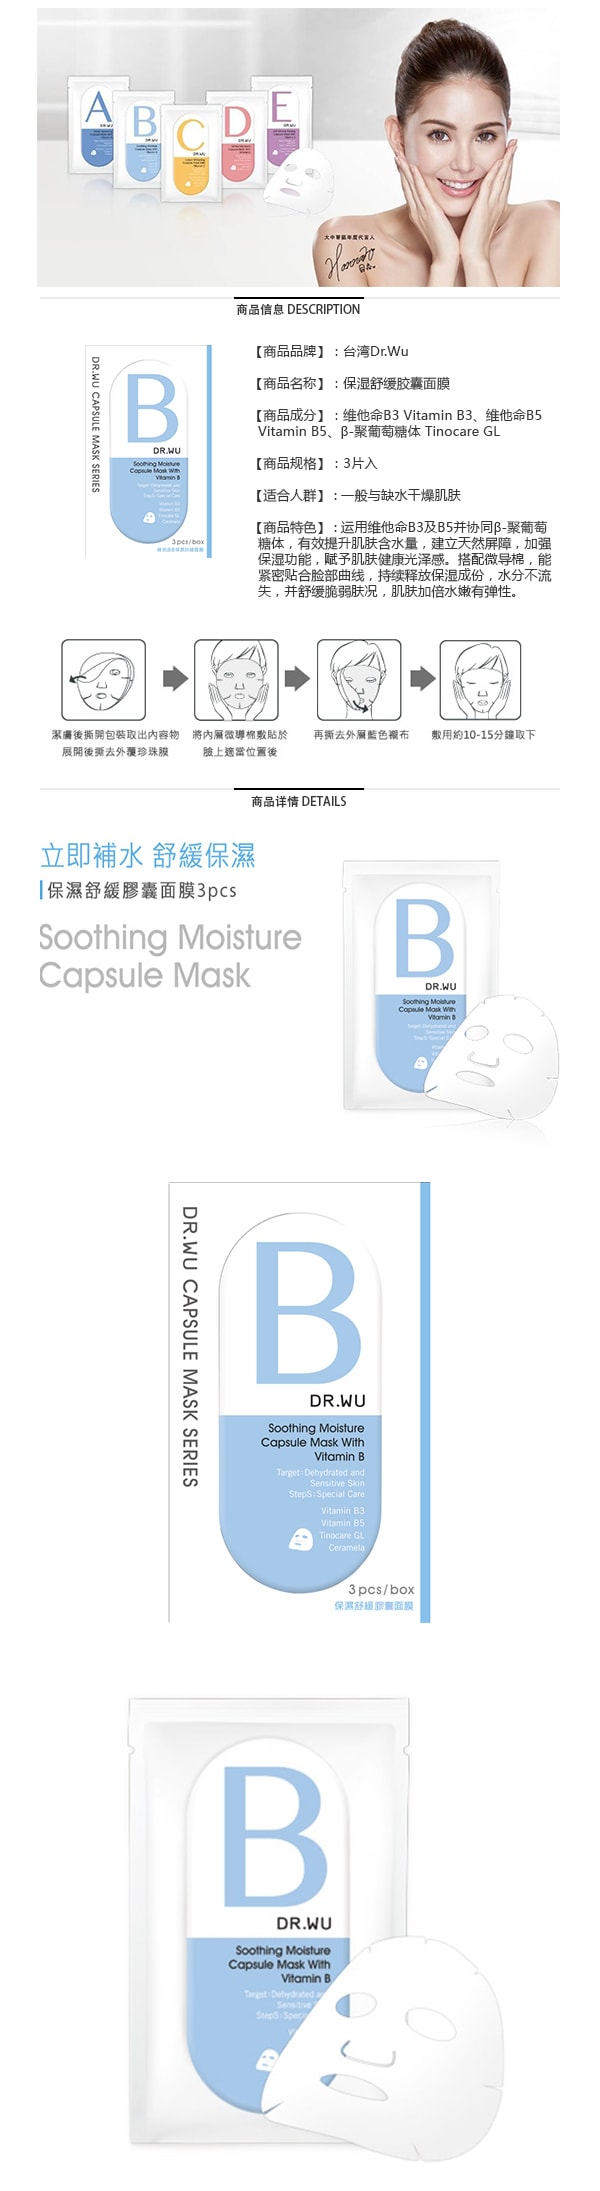 Soothing Moisture Capsule Mask 3sheets